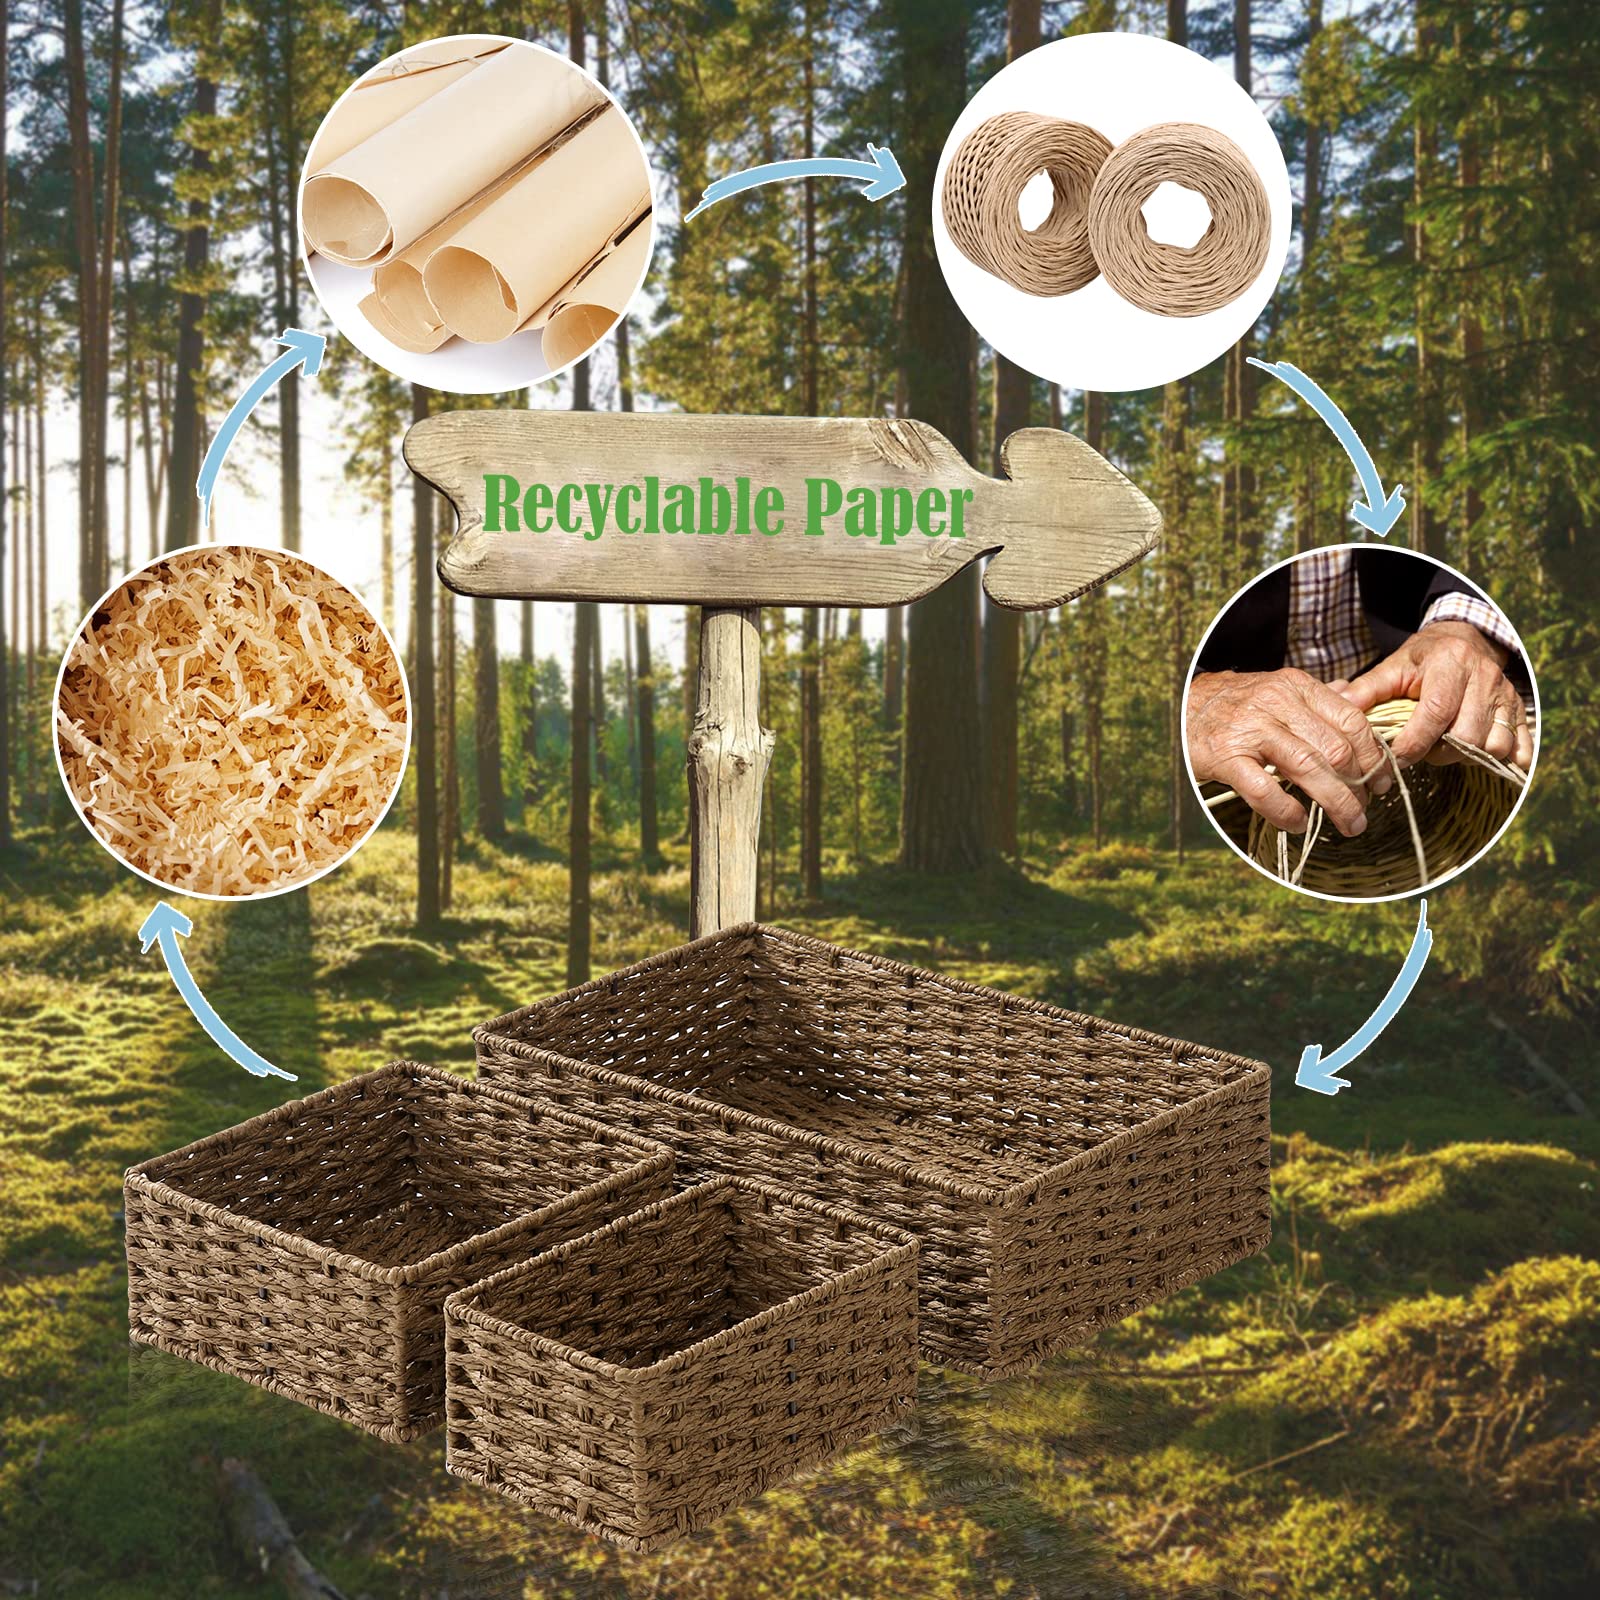 FairyHaus Handmade Wicker Storage Basket 3Pack, Recyclable & Renewable Paper Rope Small Wicker Baskets for Storage, Brown Woven Baskets Set for Organizing Rectangle